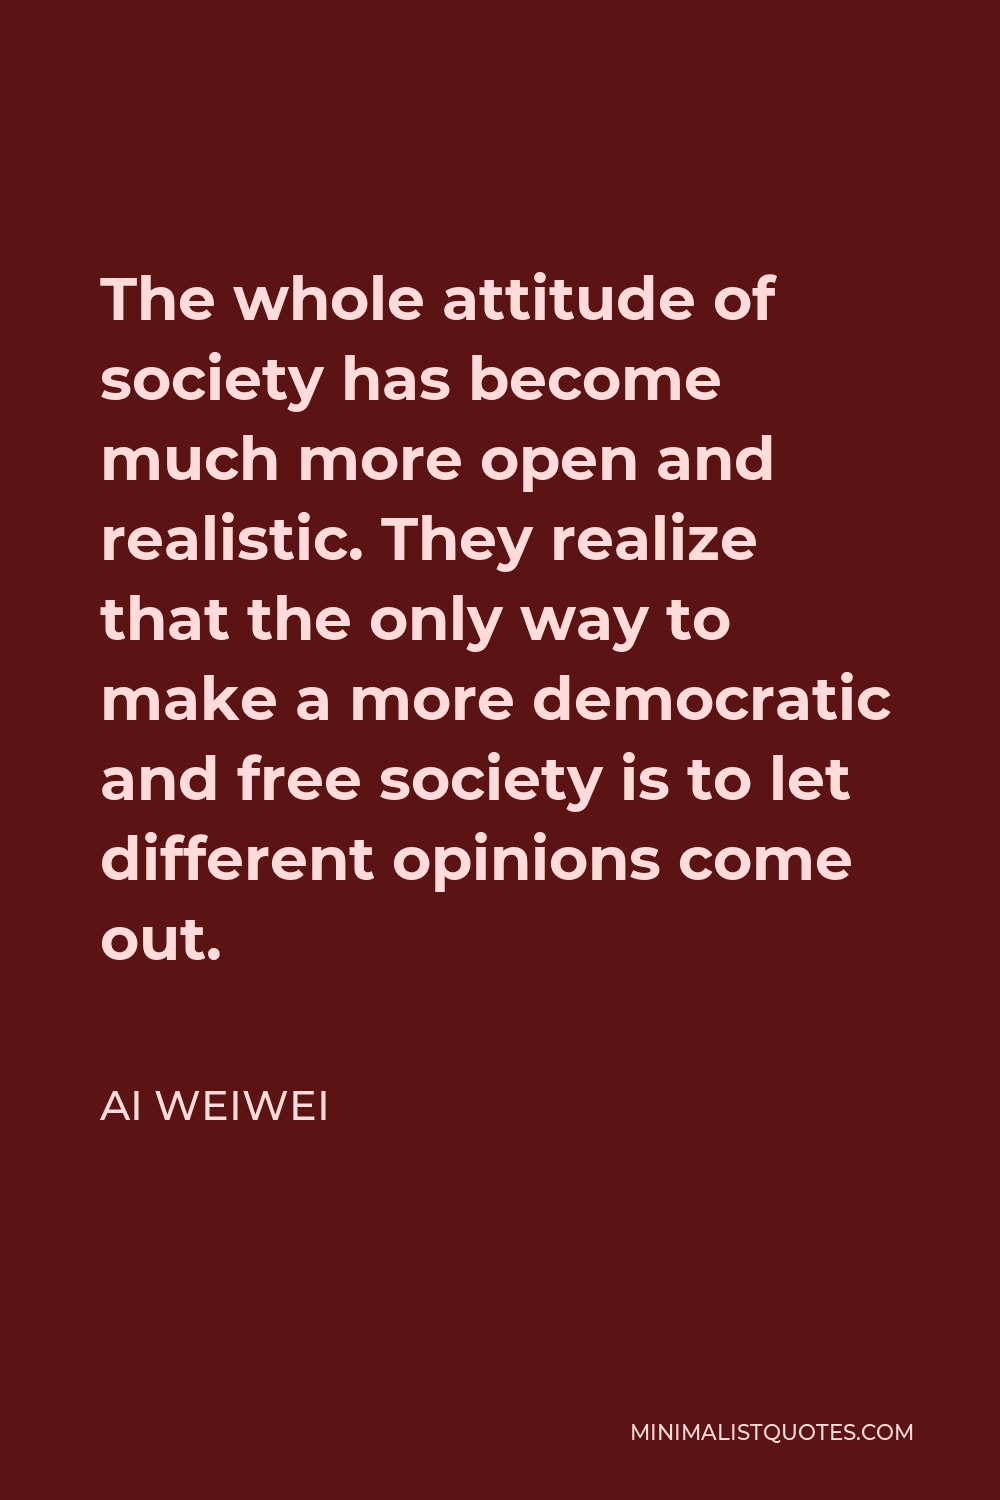 Ai Weiwei Quote - The whole attitude of society has become much more open and realistic. They realize that the only way to make a more democratic and free society is to let different opinions come out.